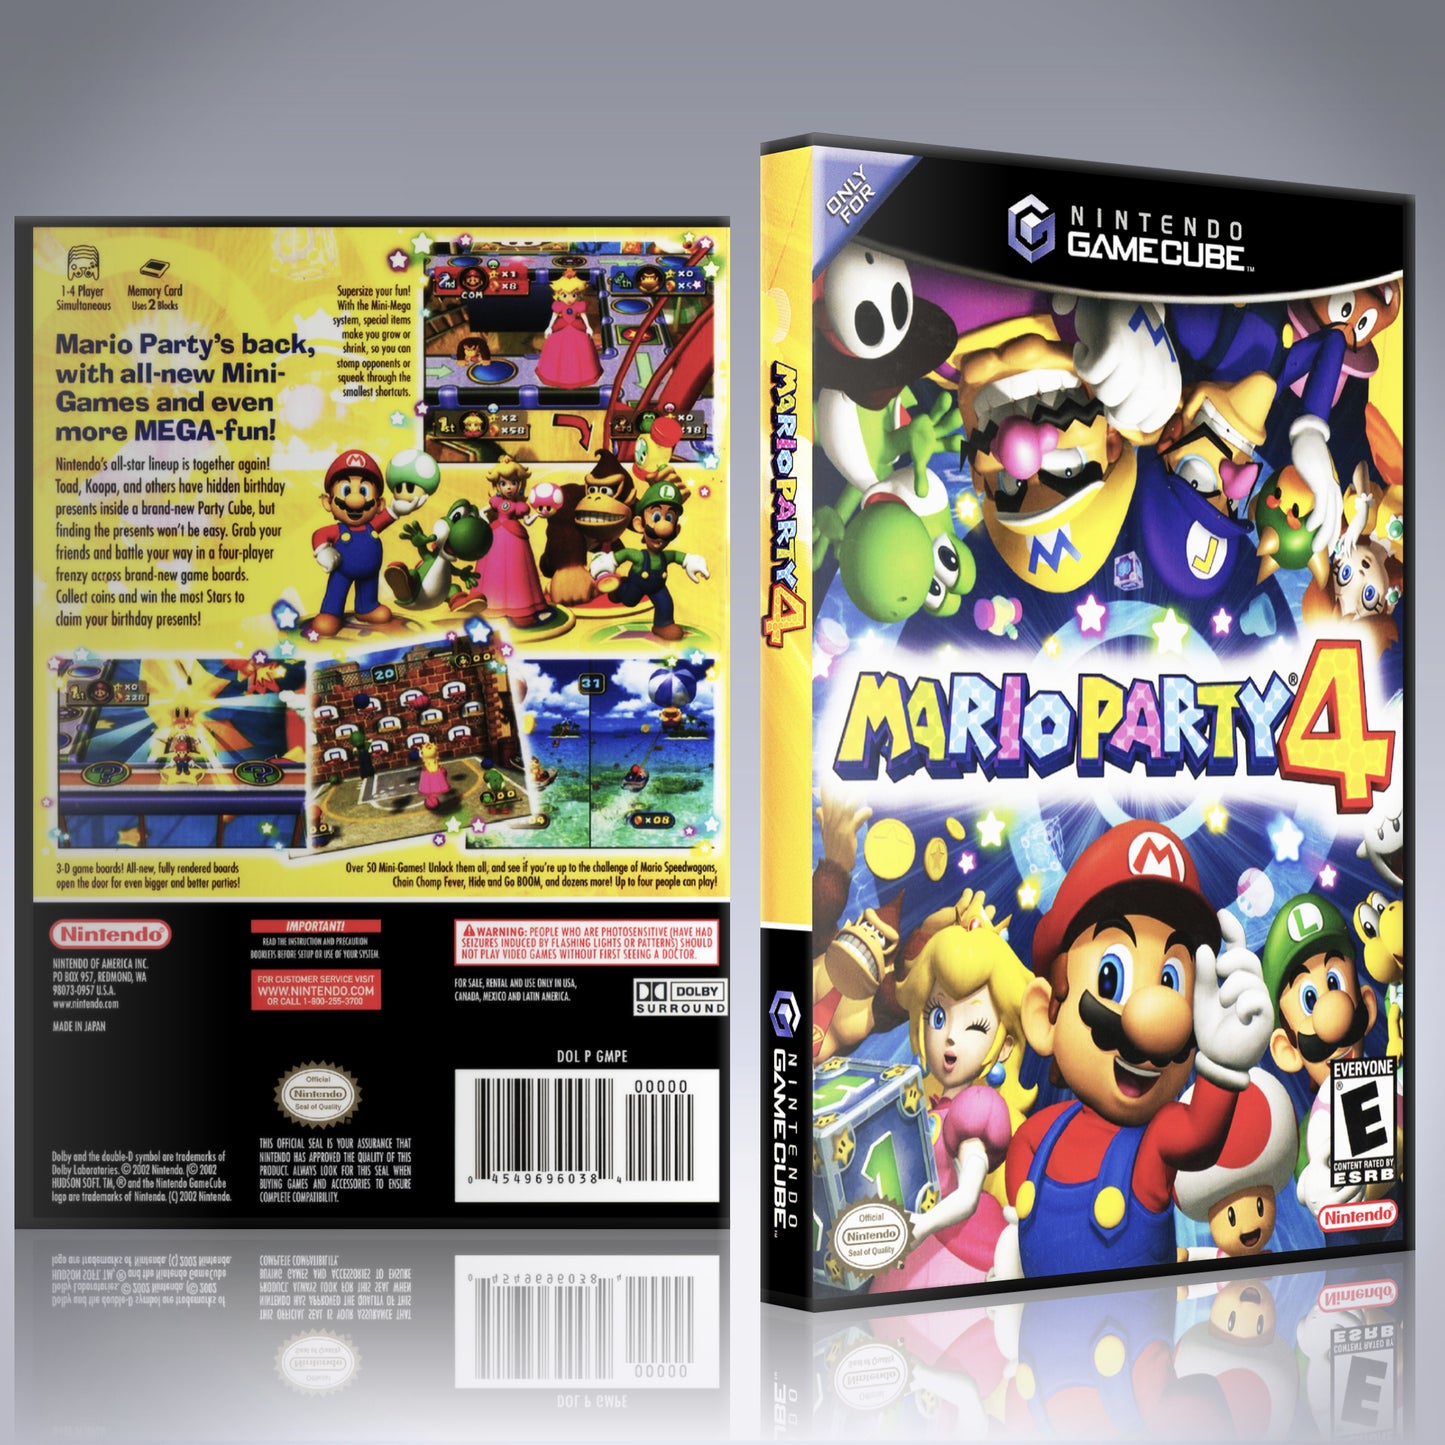 GameCube Replacement Case - NO GAME - Mario Party 4